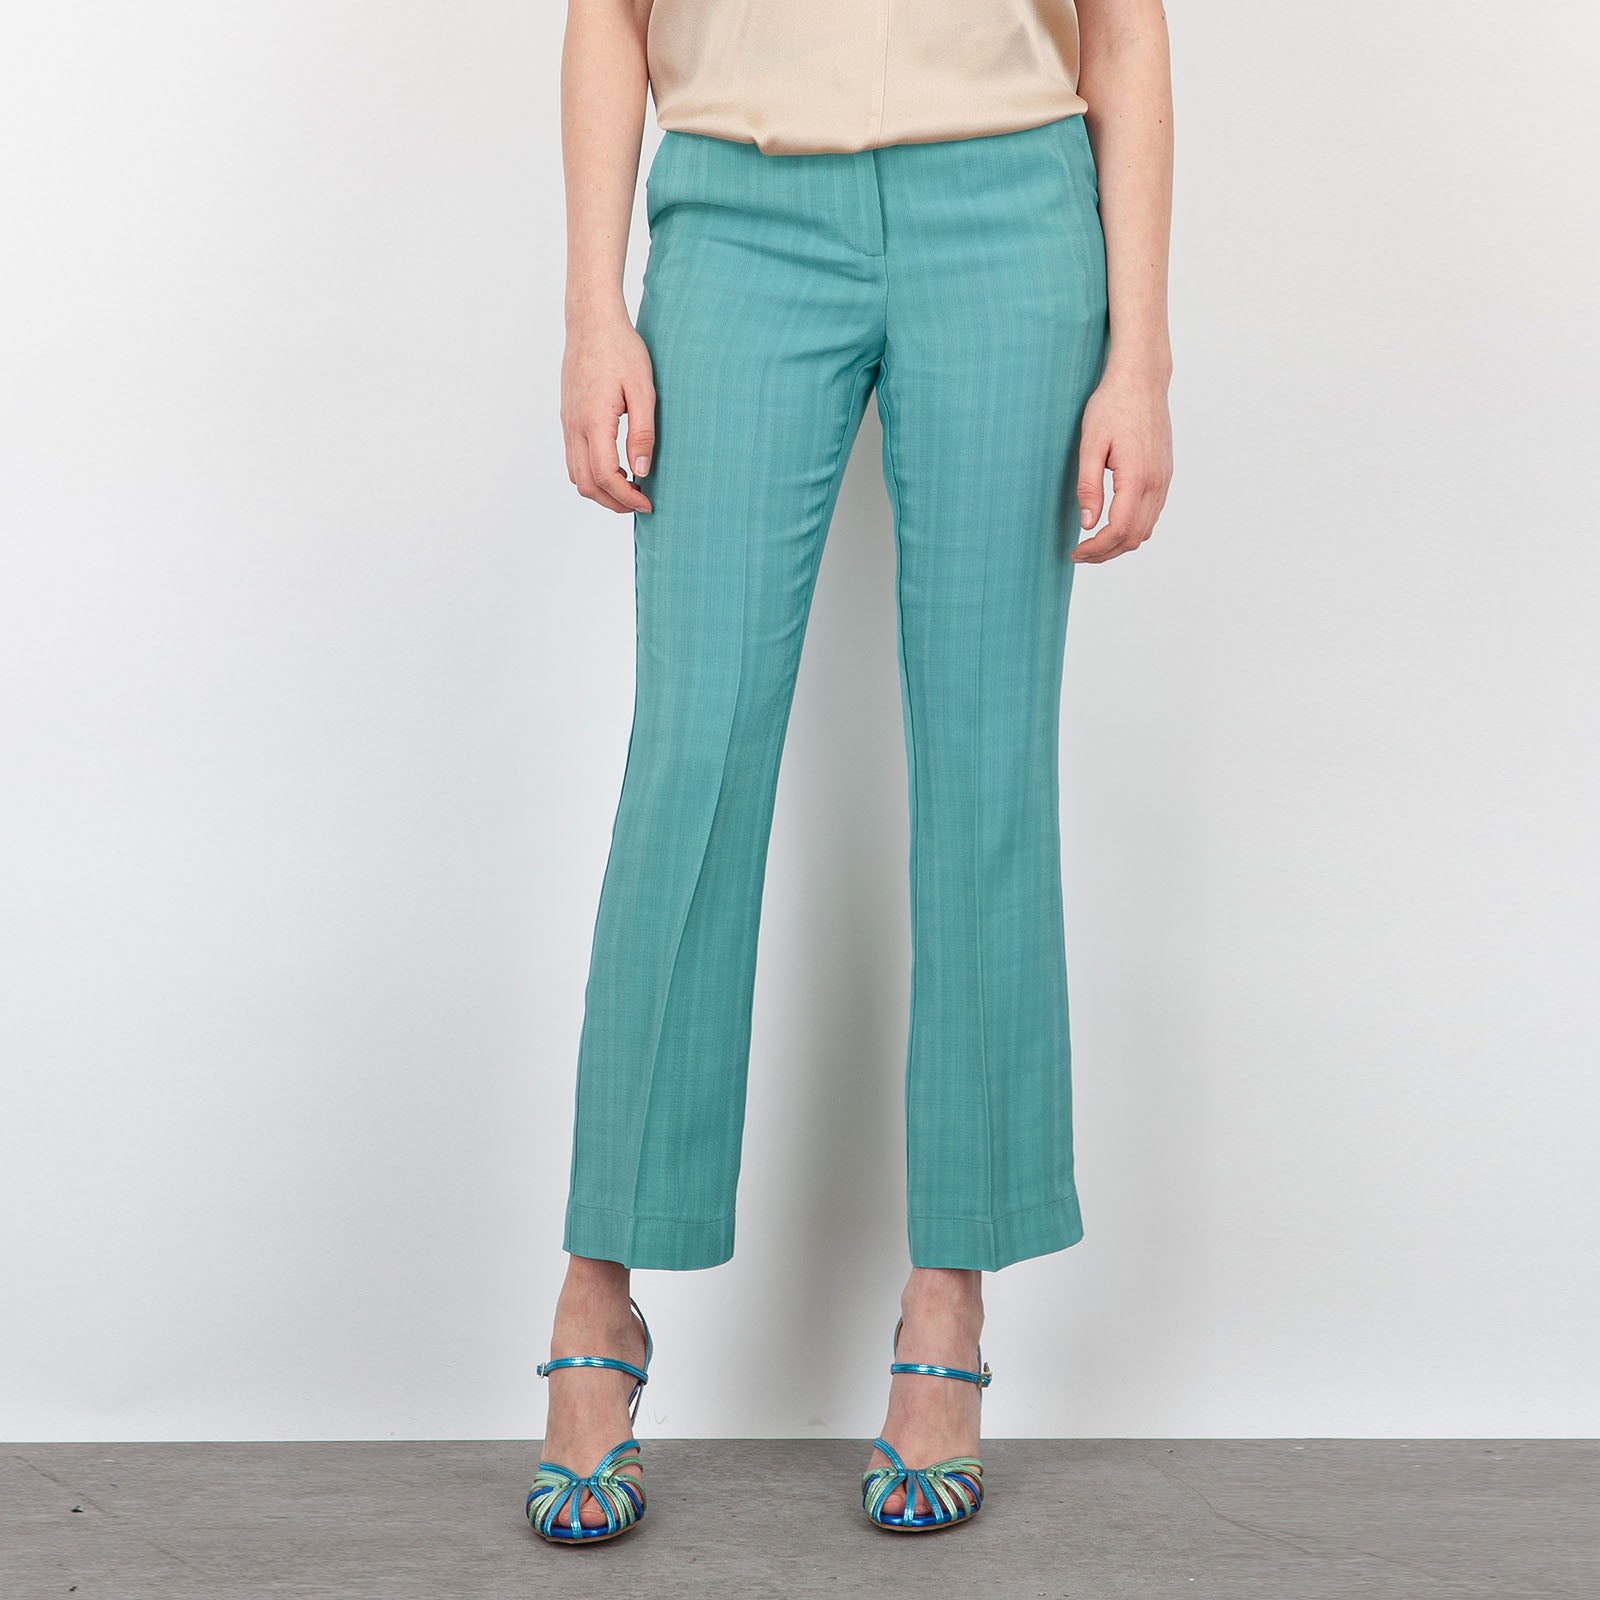 Semicouture Pamela Trousers Synthetic Teal Green - 7